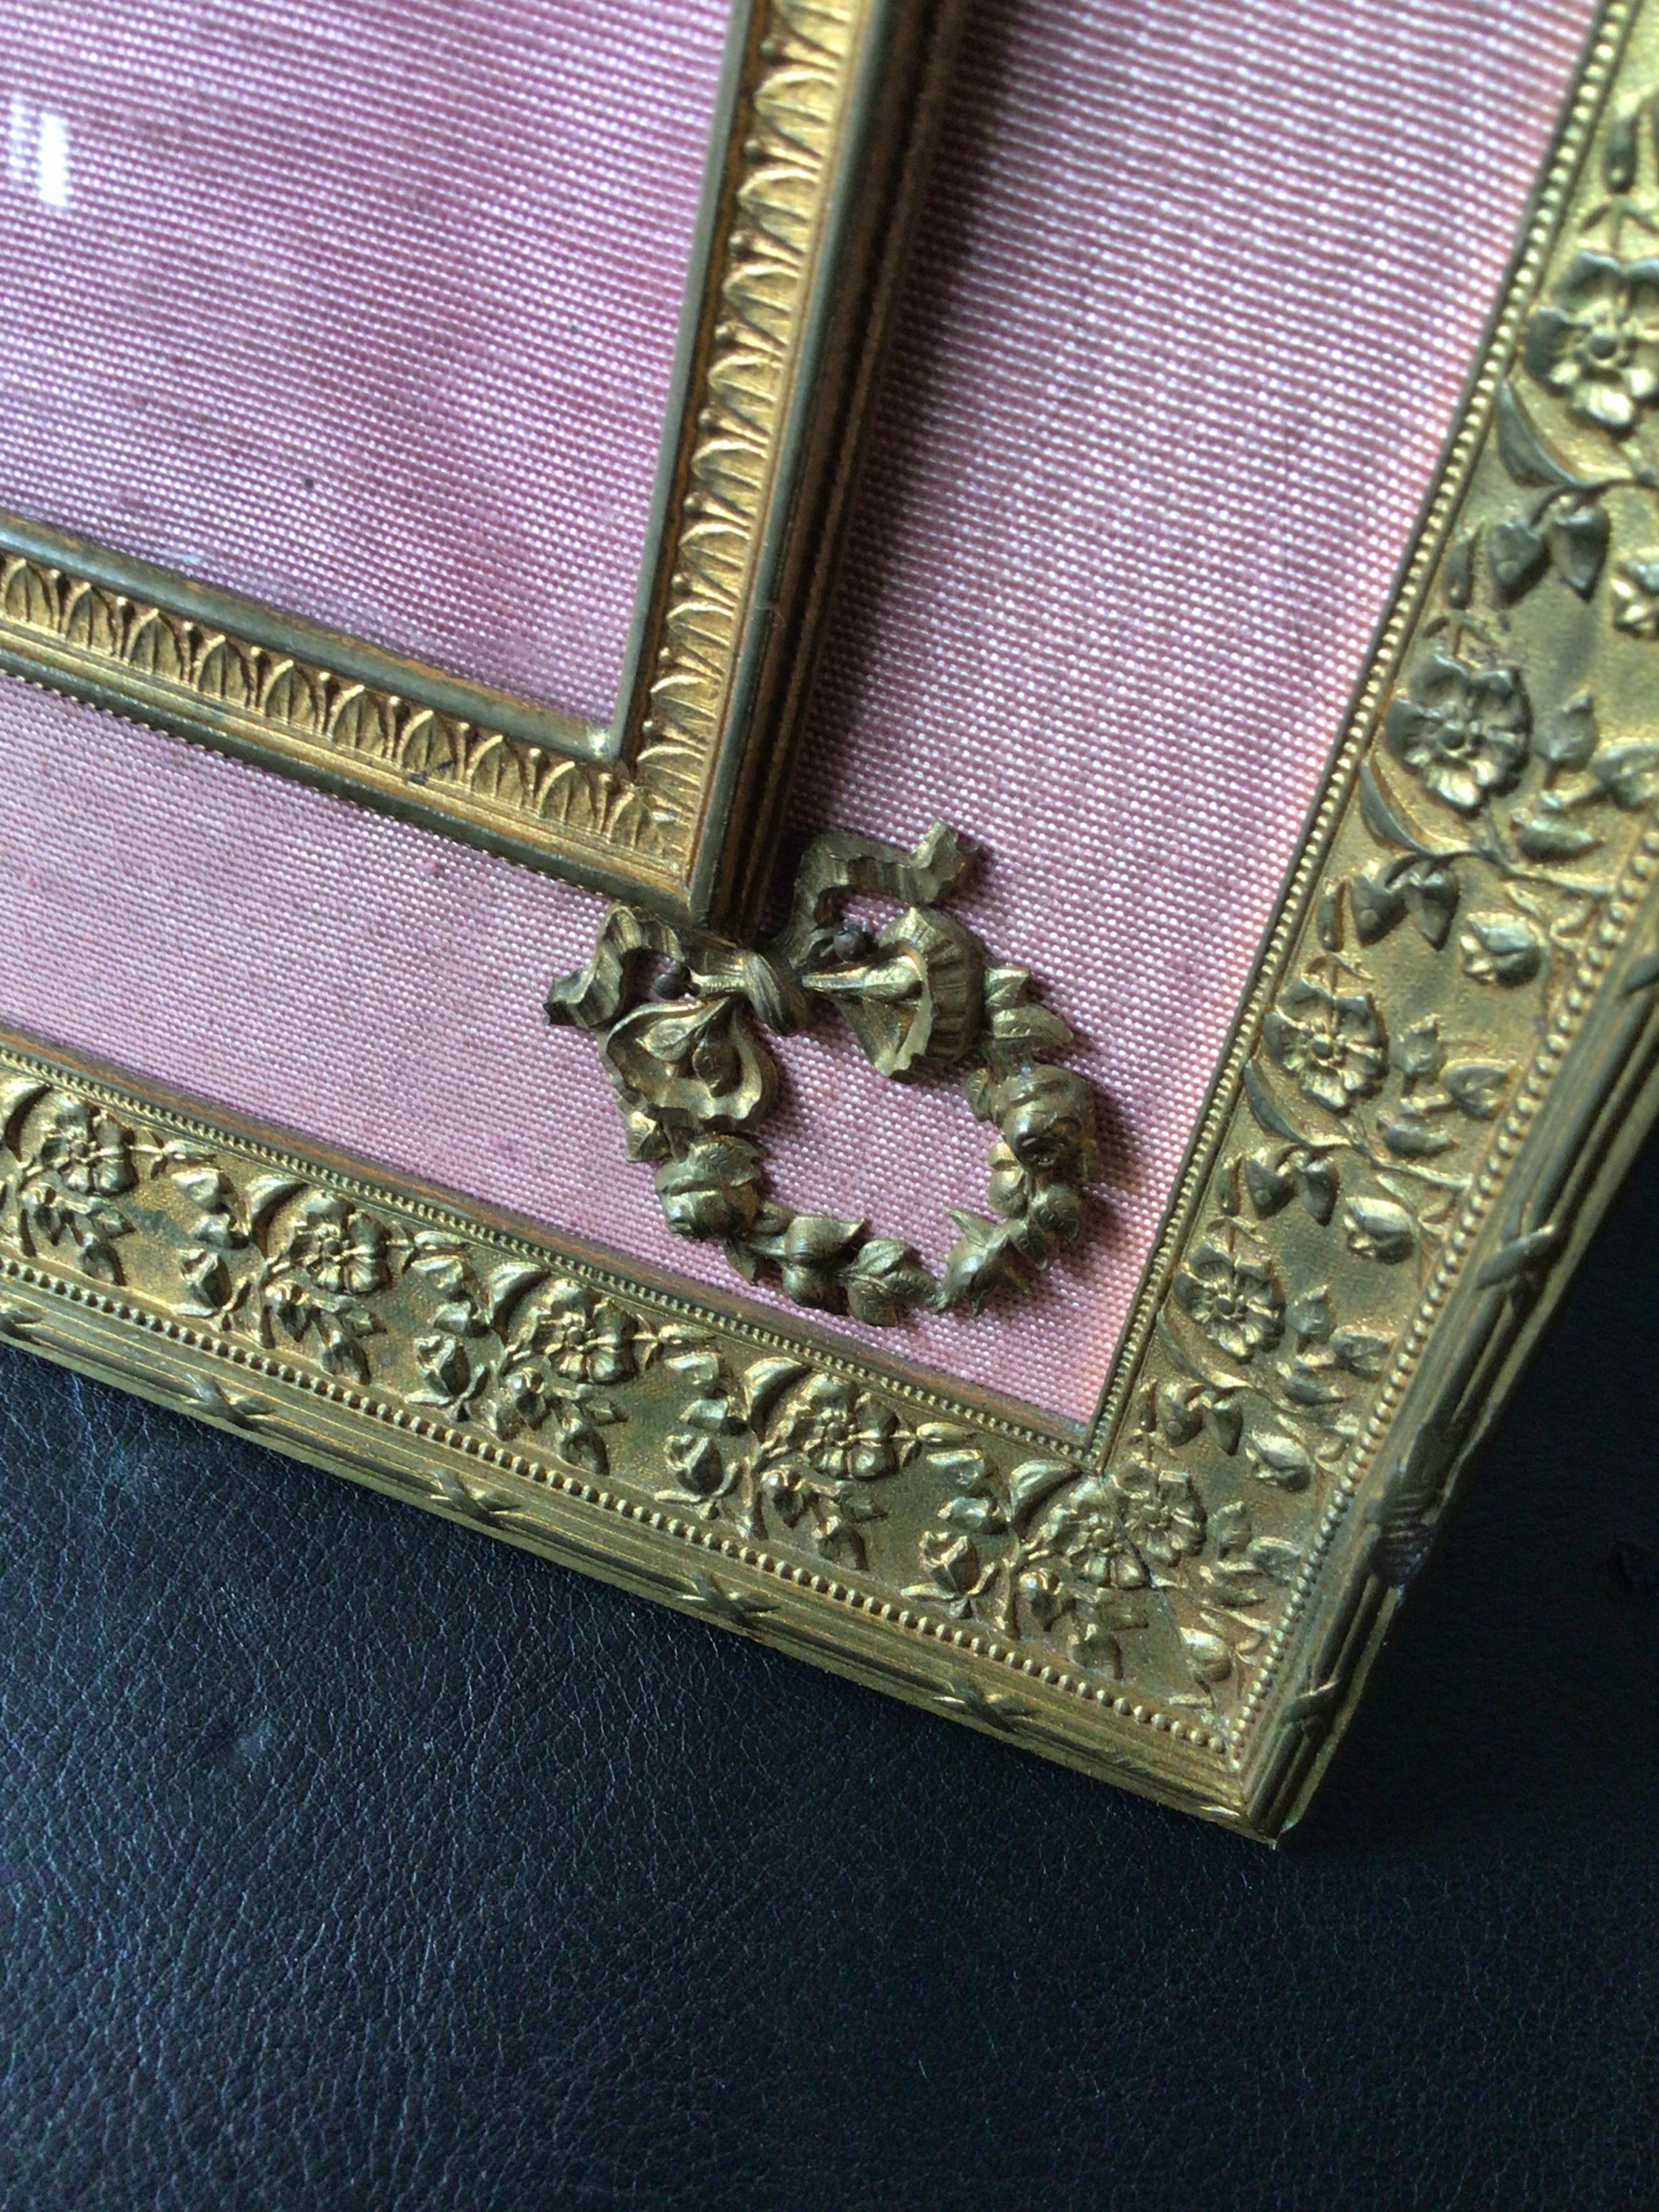 1930s picture frames